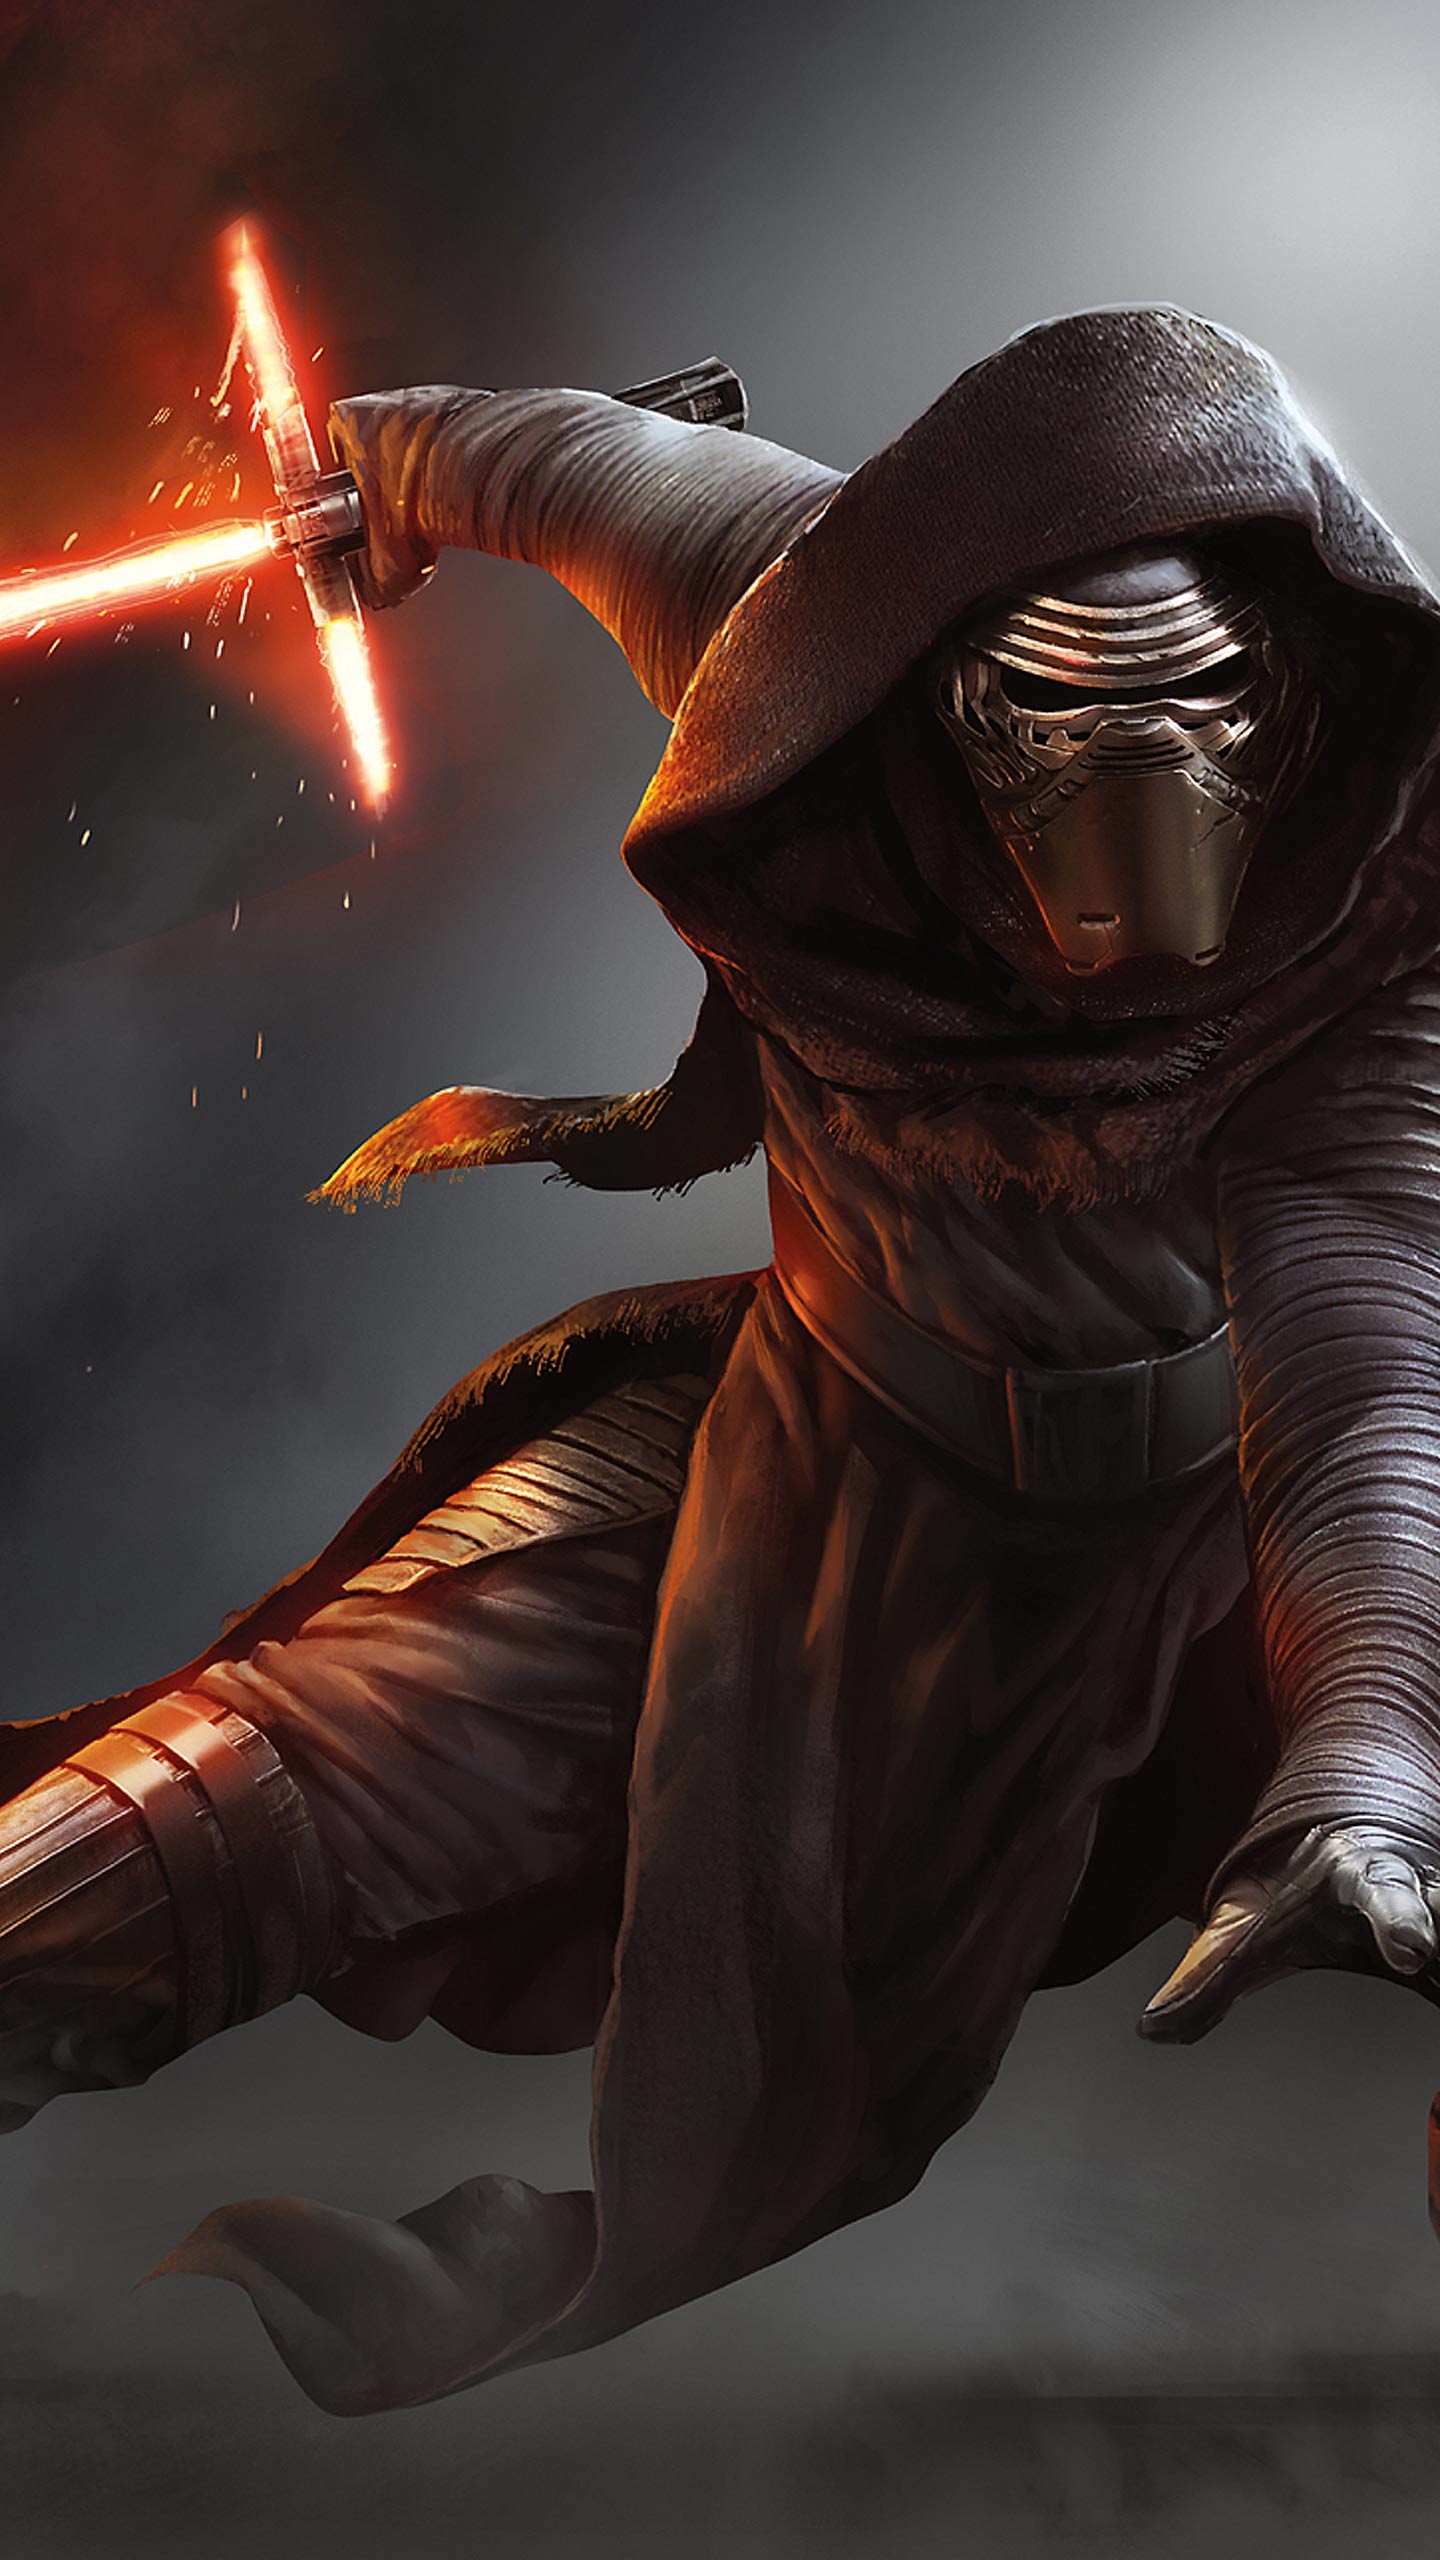 Star Wars: The Force Awakens wallpapers for your iPhone 6s and Galaxy S6